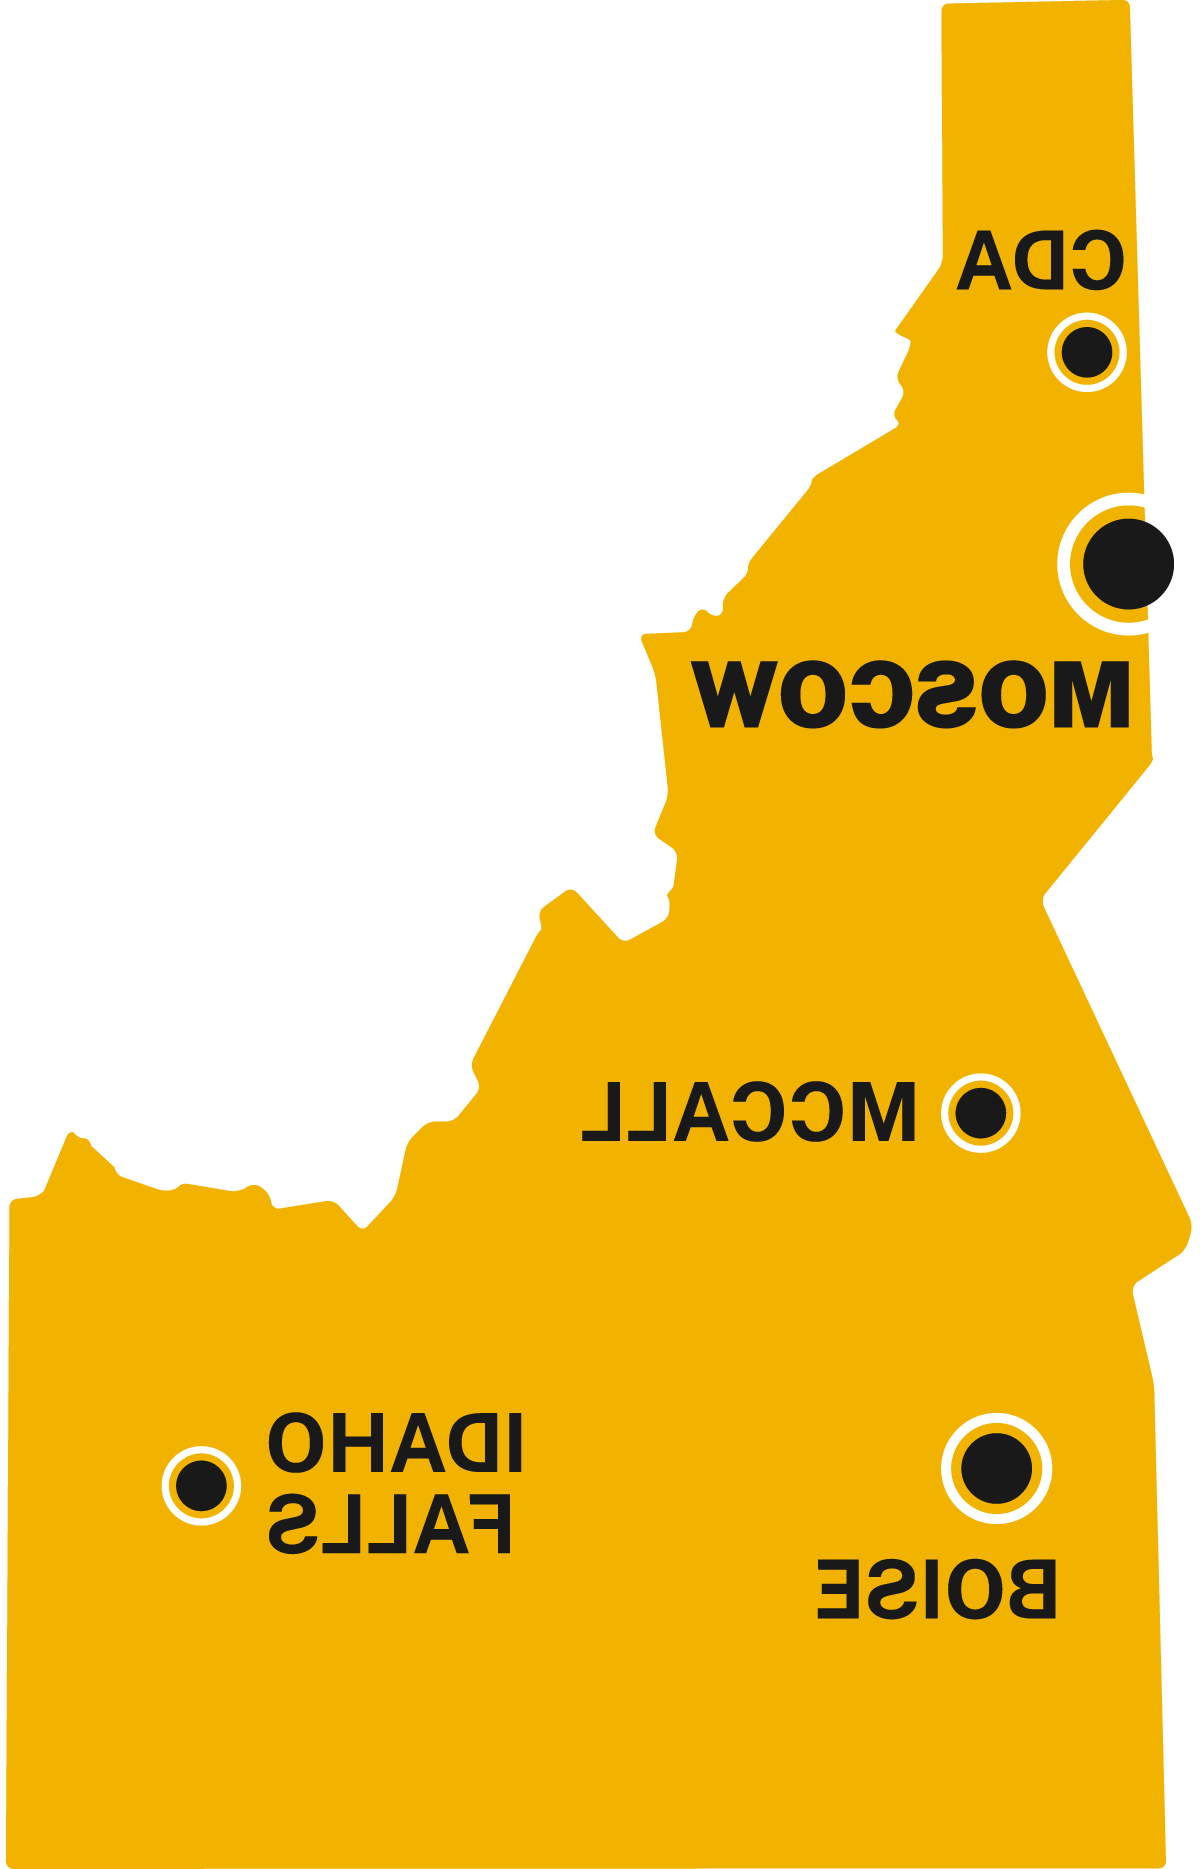 Graphic representation of Idaho and its campuses, research and extension centers in Coeur d’Alene, Moscow, McCall, Boise and Idaho Falls.